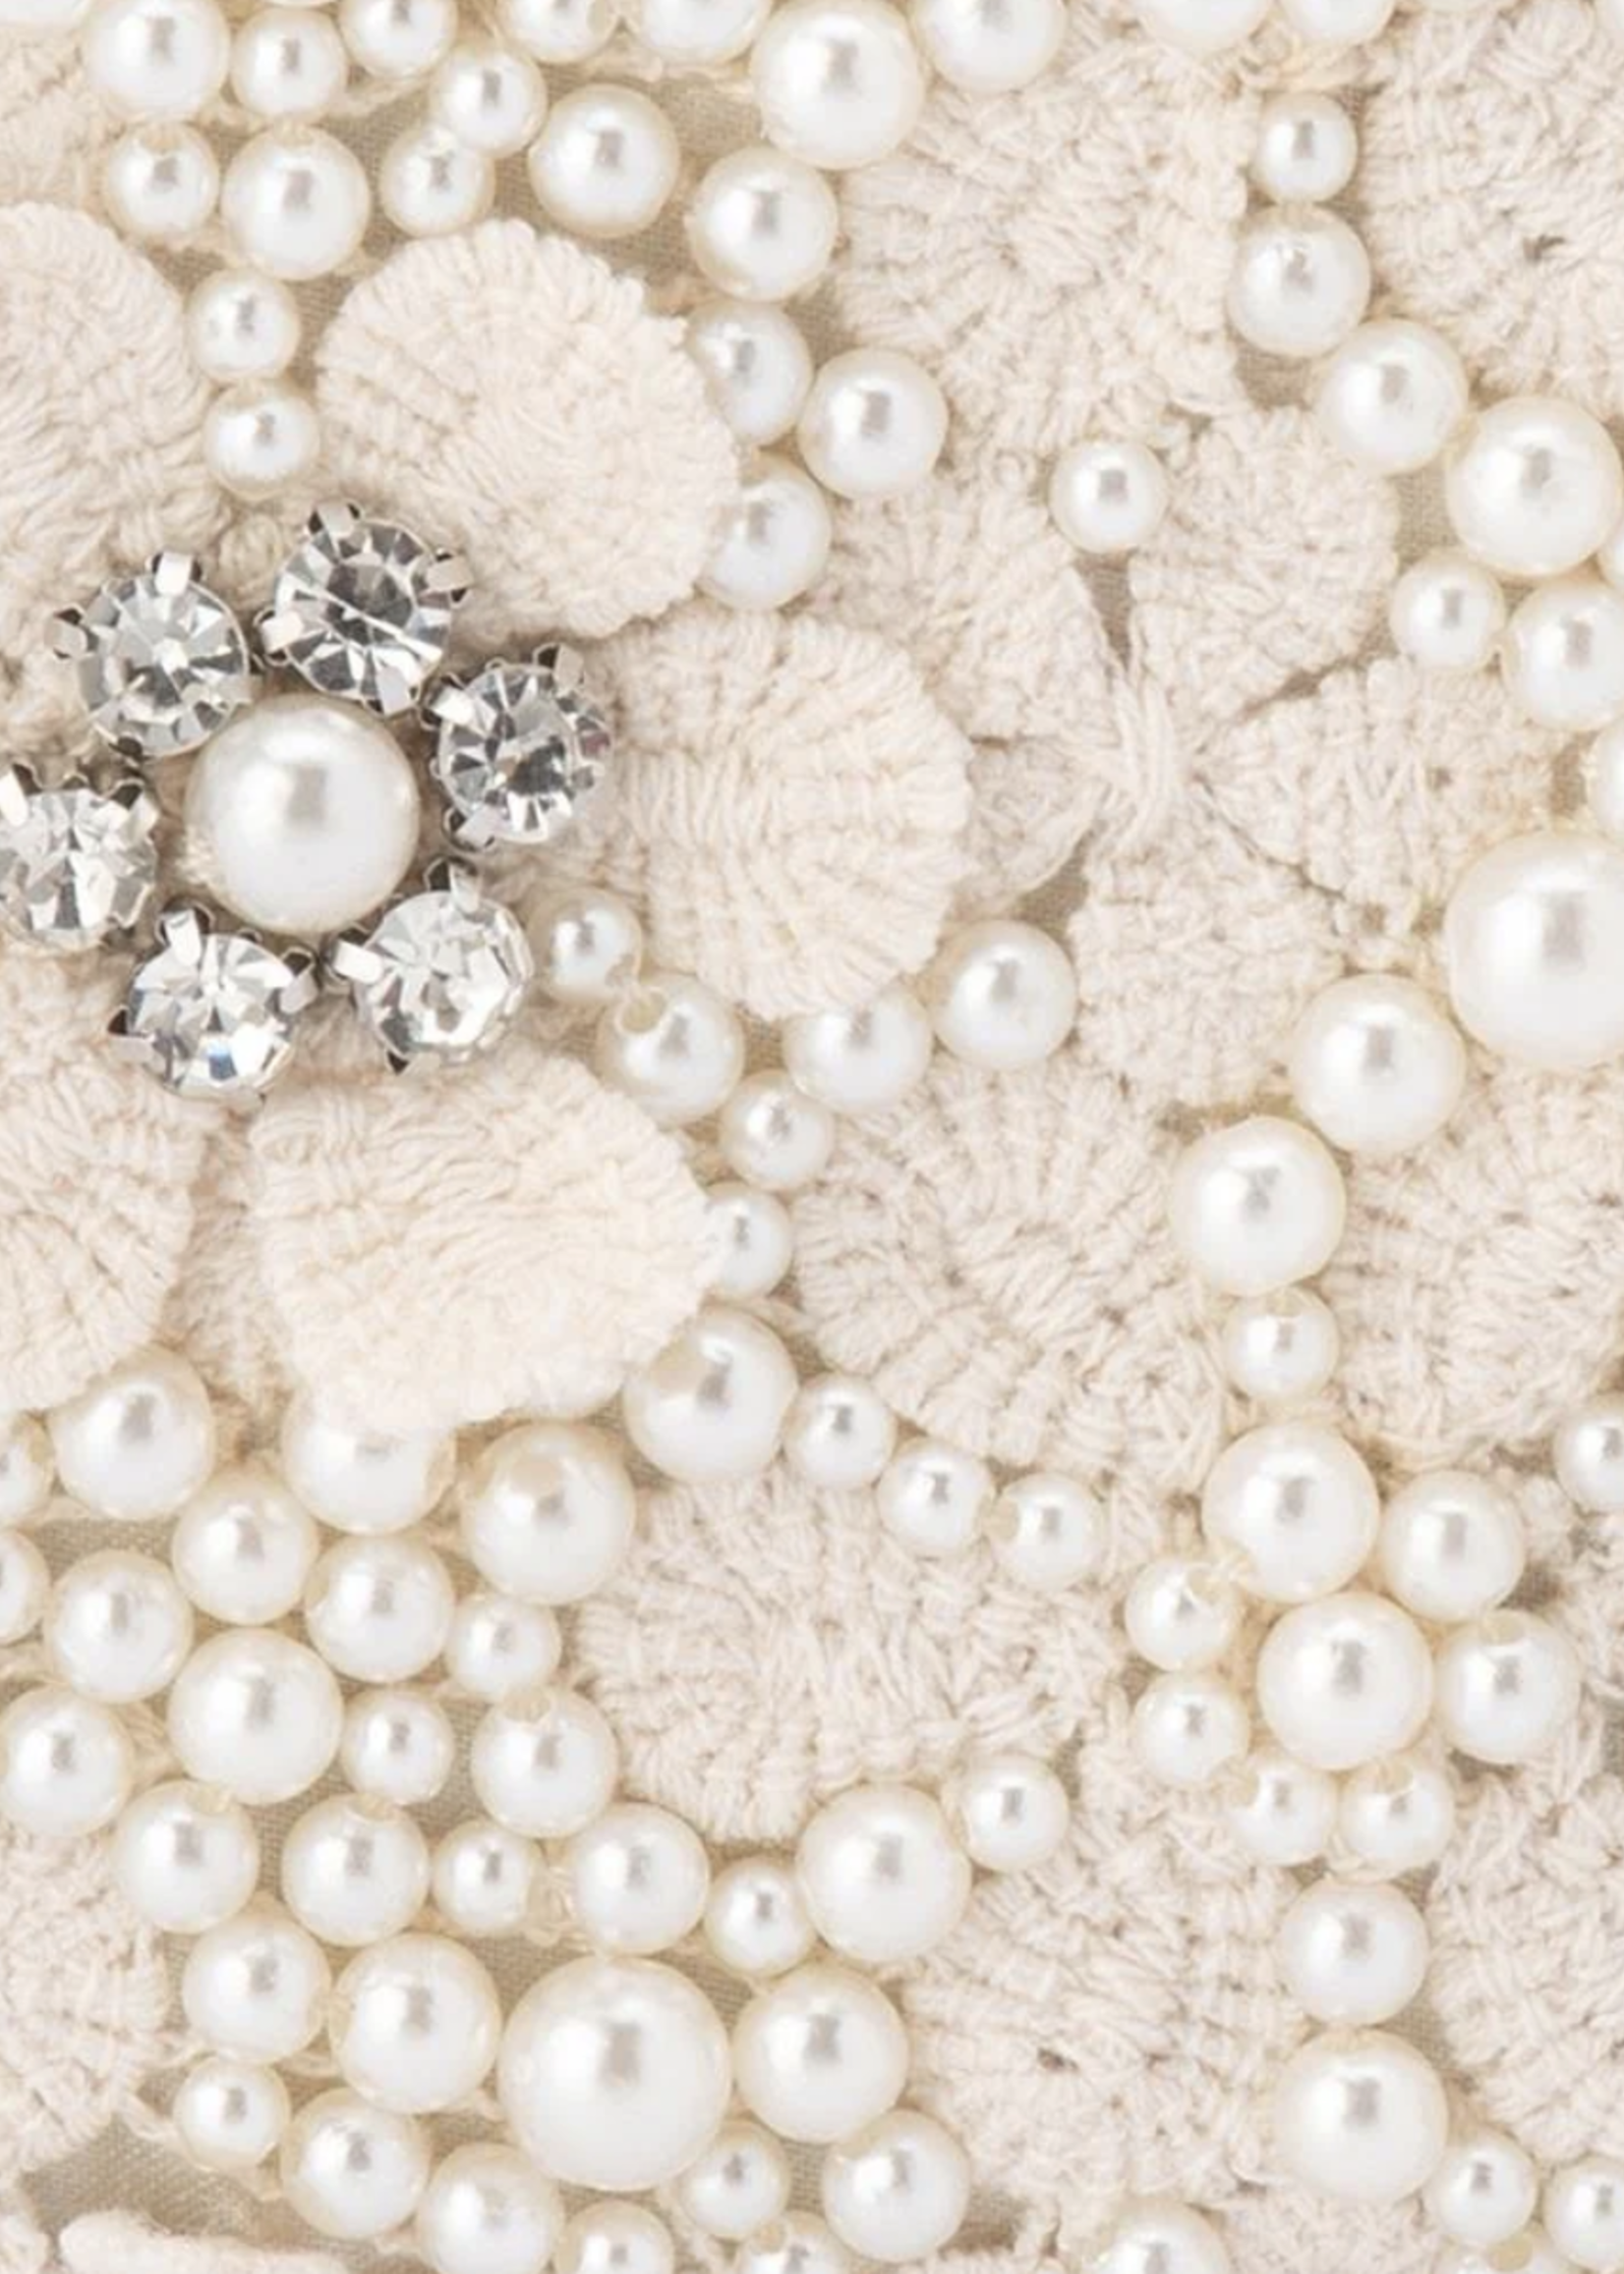 Elitaire Boutique Beth Encrusted Clutch in Ivory